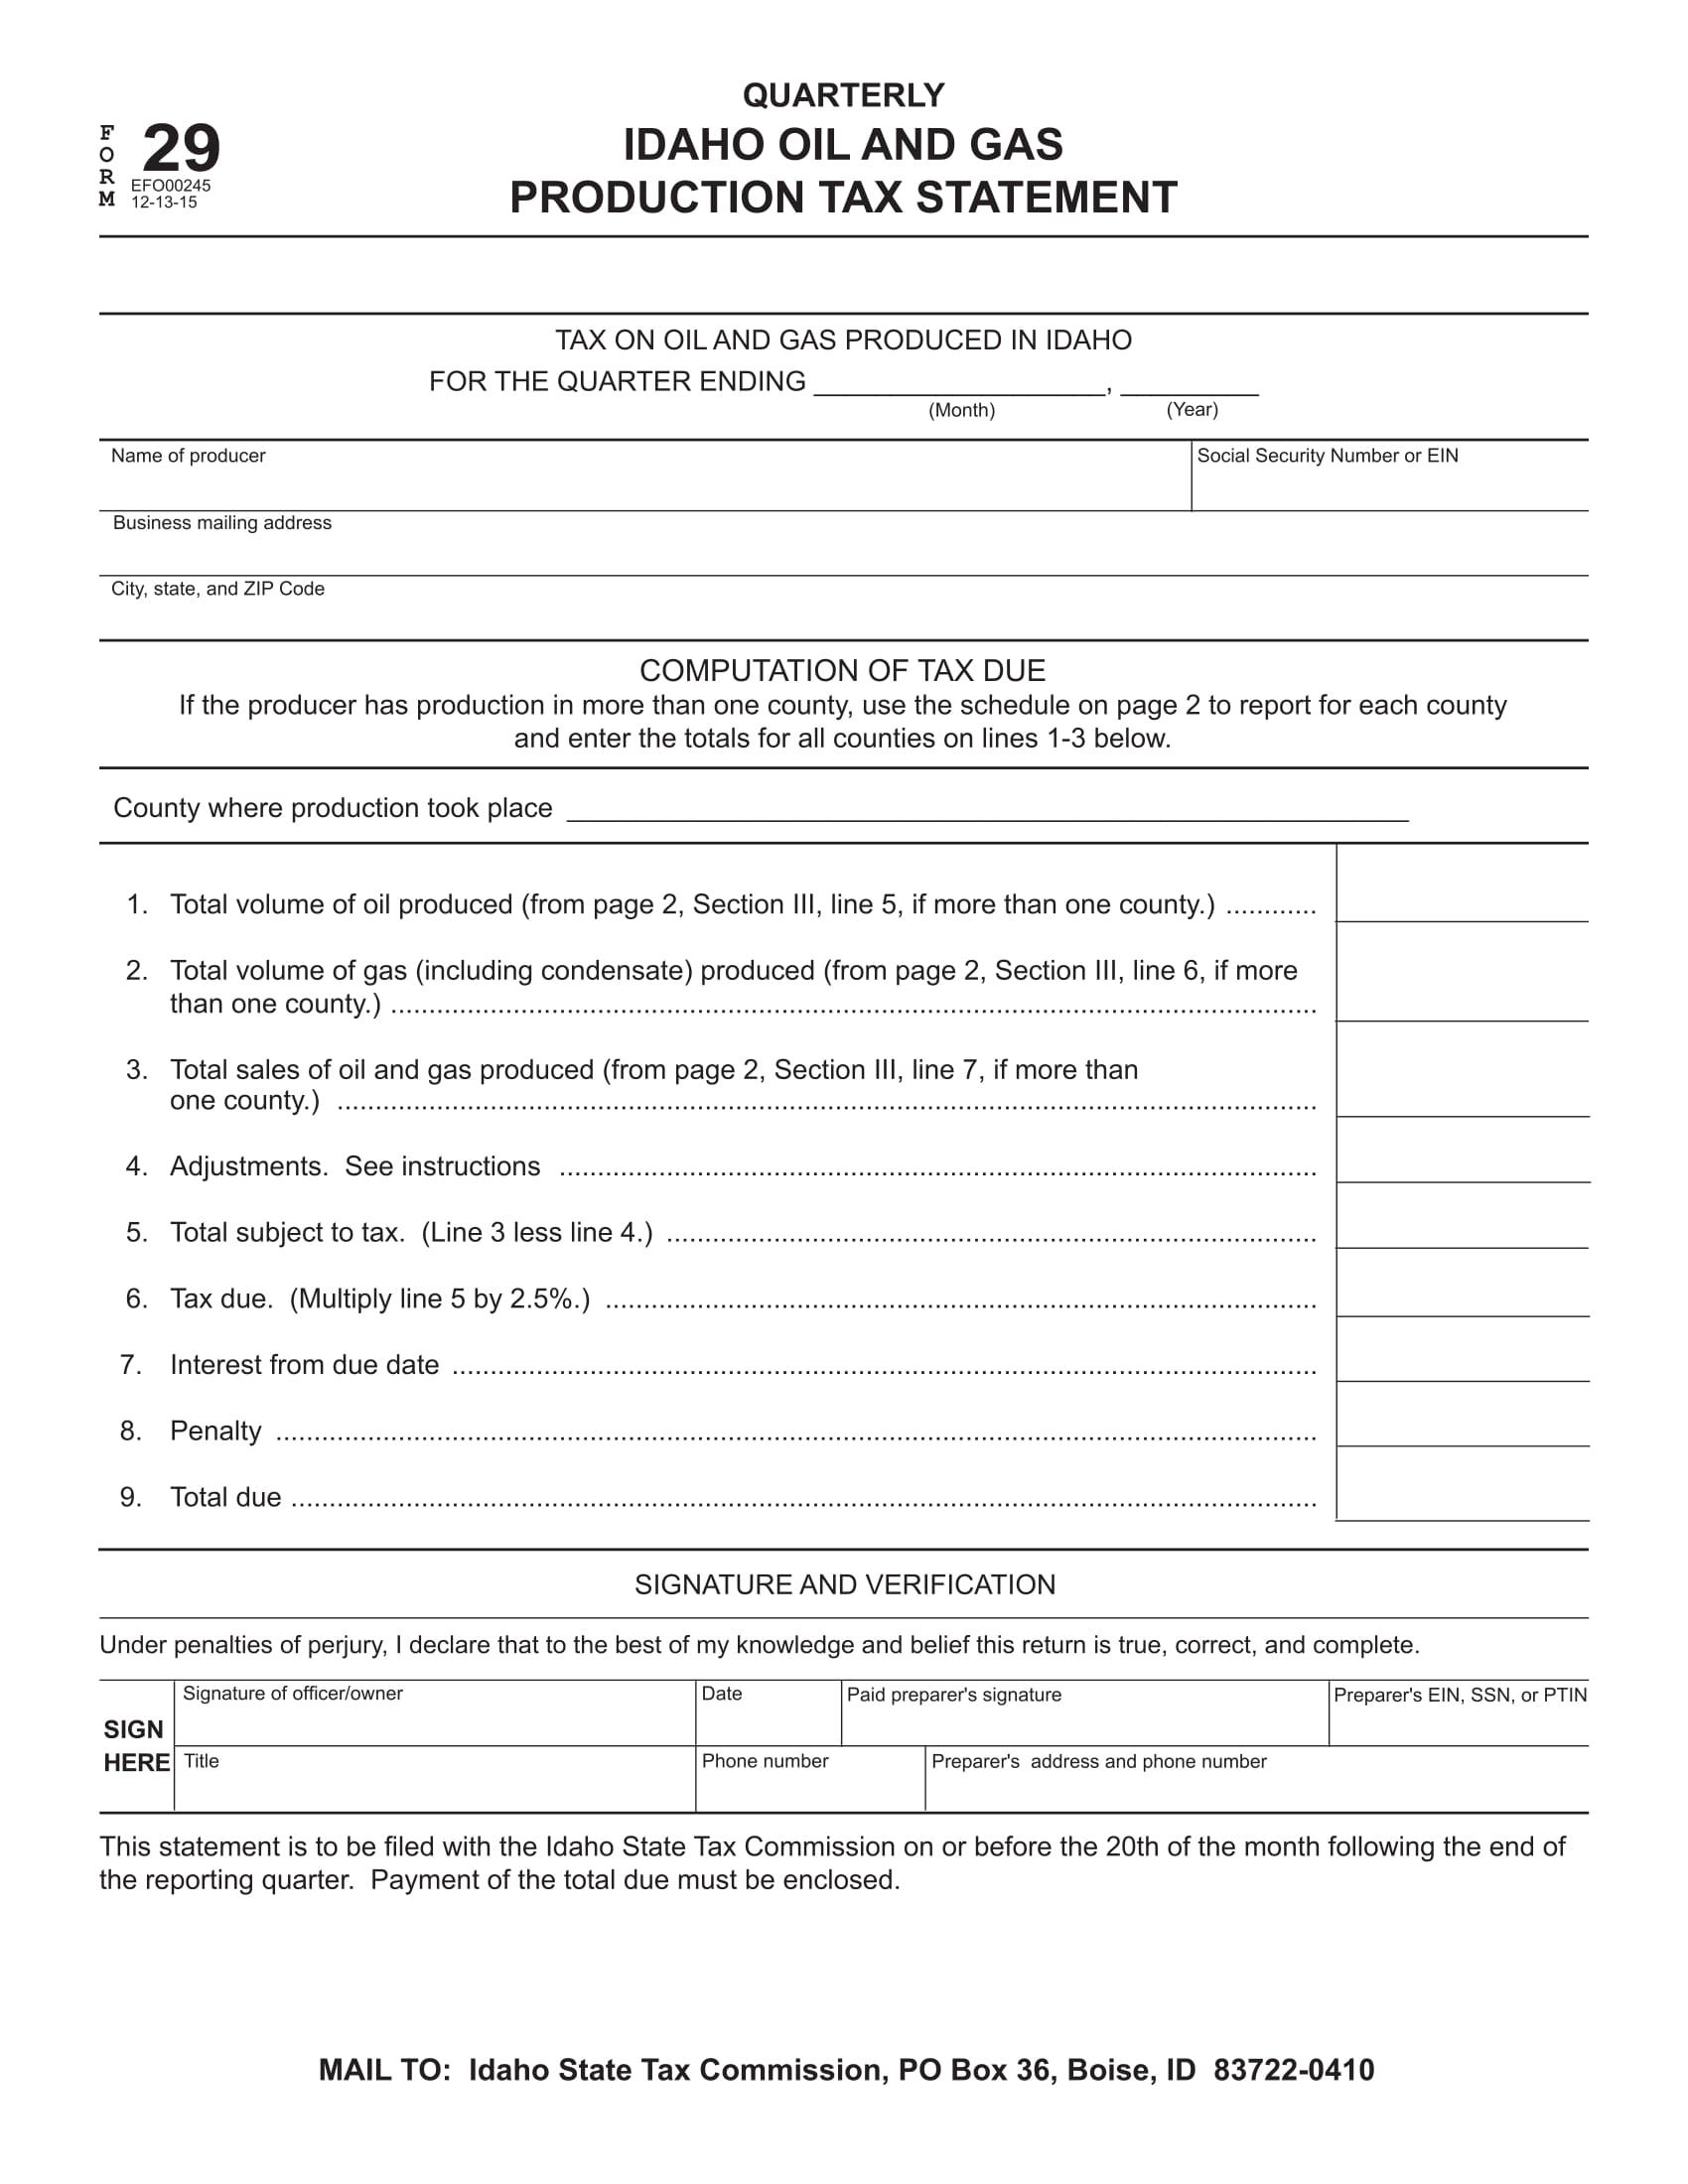 gas production tax statement form 1